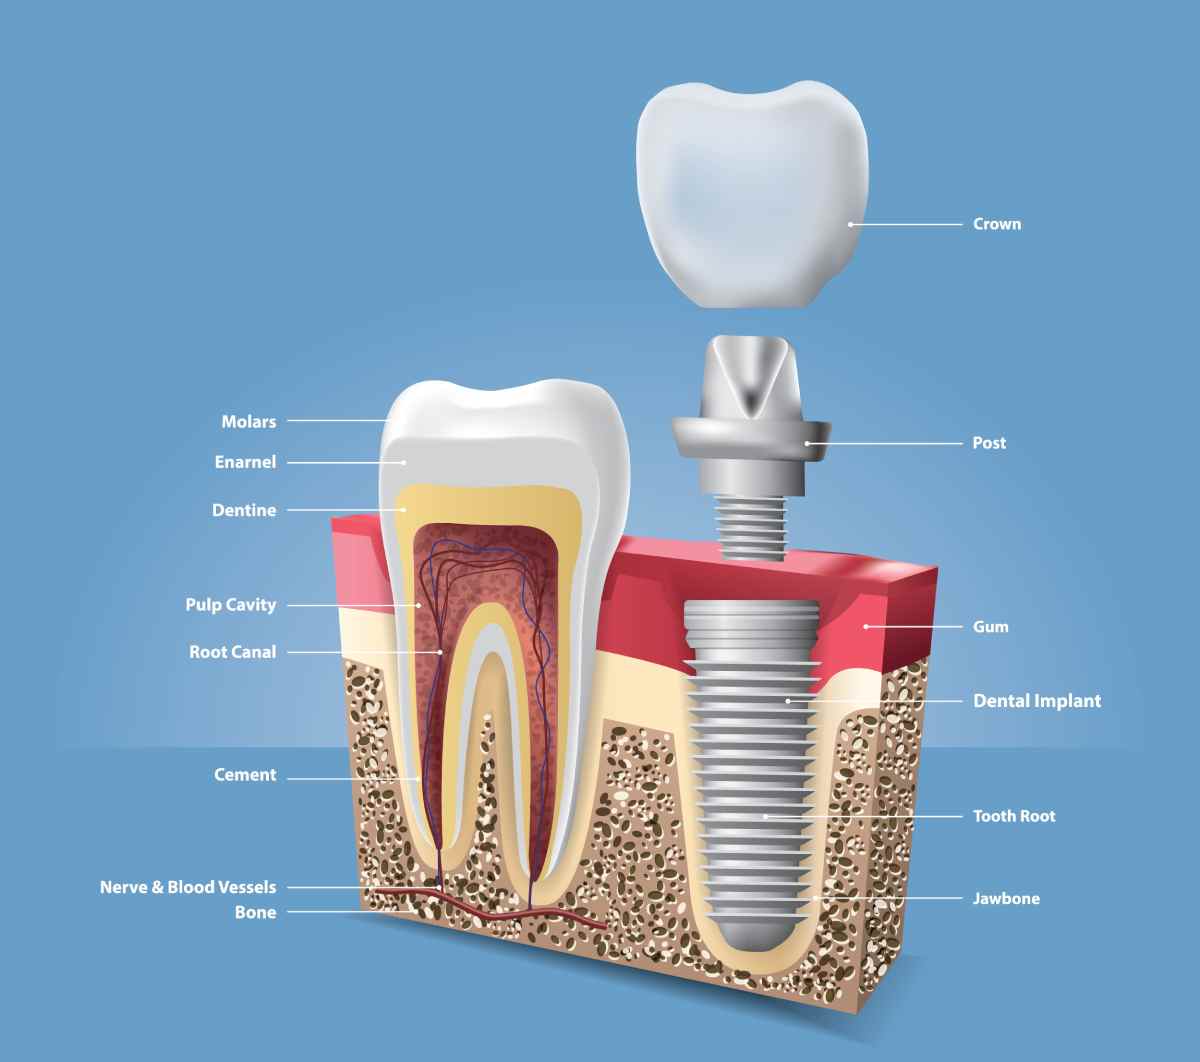 A detailed graph of all the different parts of a dental implant and surronding anatomy